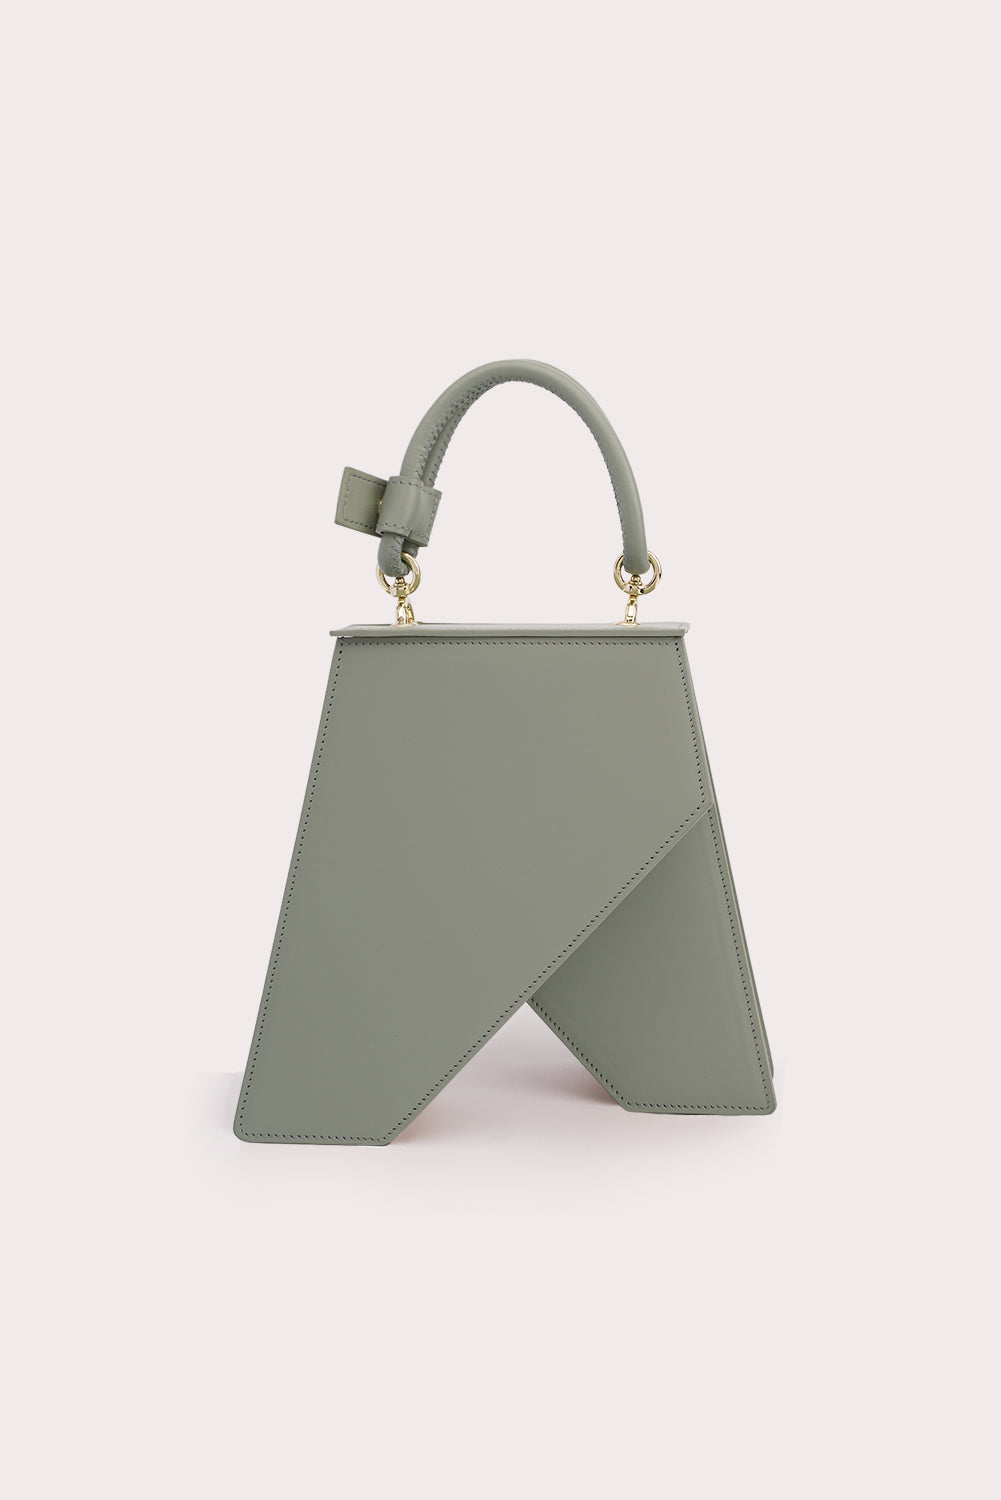 Trapezoid Tapo Bag in Matcha Green-1